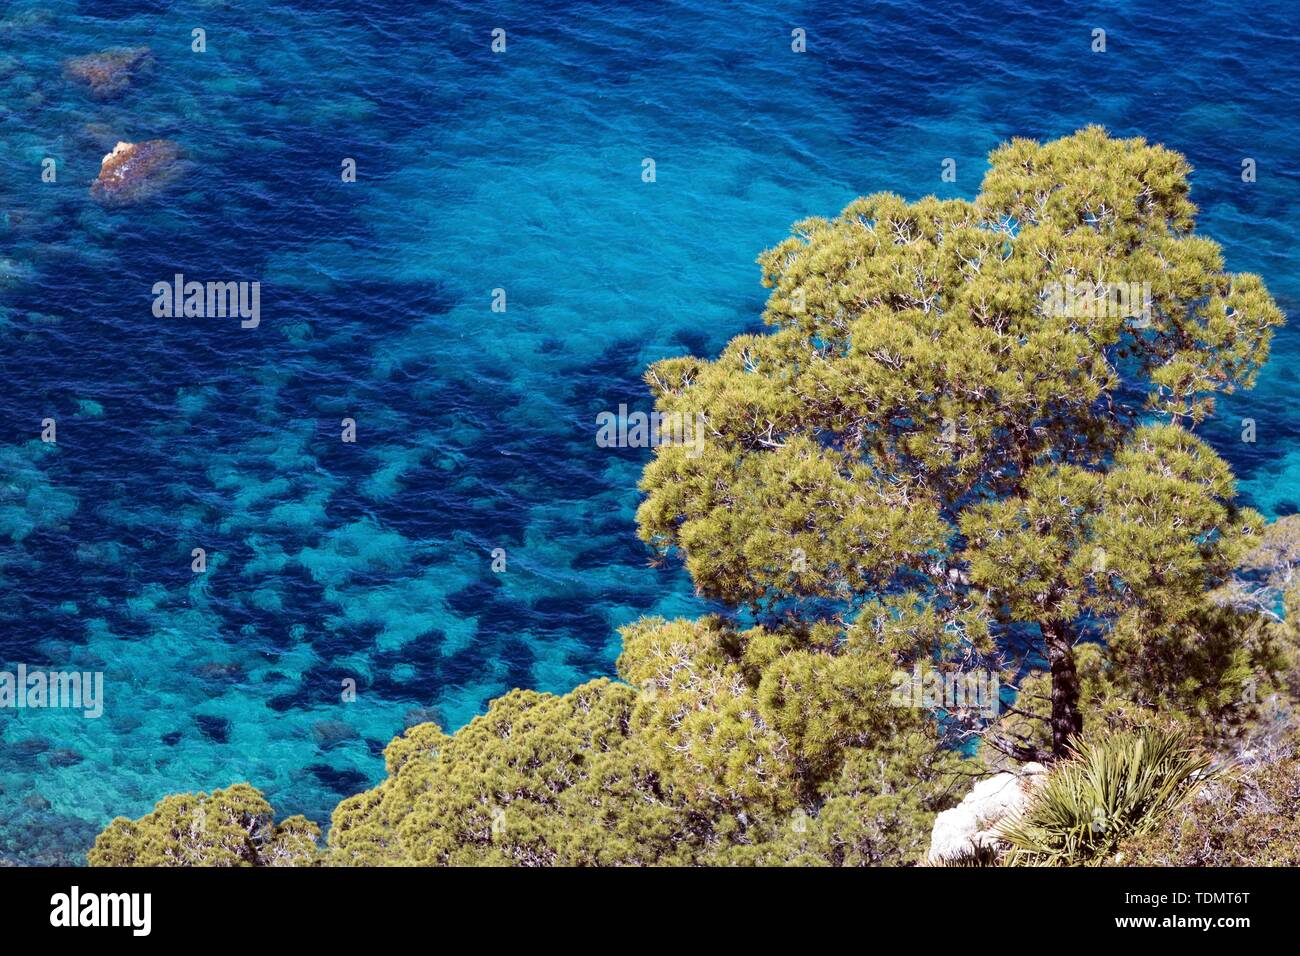 Aleppo Pine (Pinus halepensis) grows on a rock in front of turquoise sea, near Sant Elm, Majorca, Balearic Islands, Spain Stock Photo